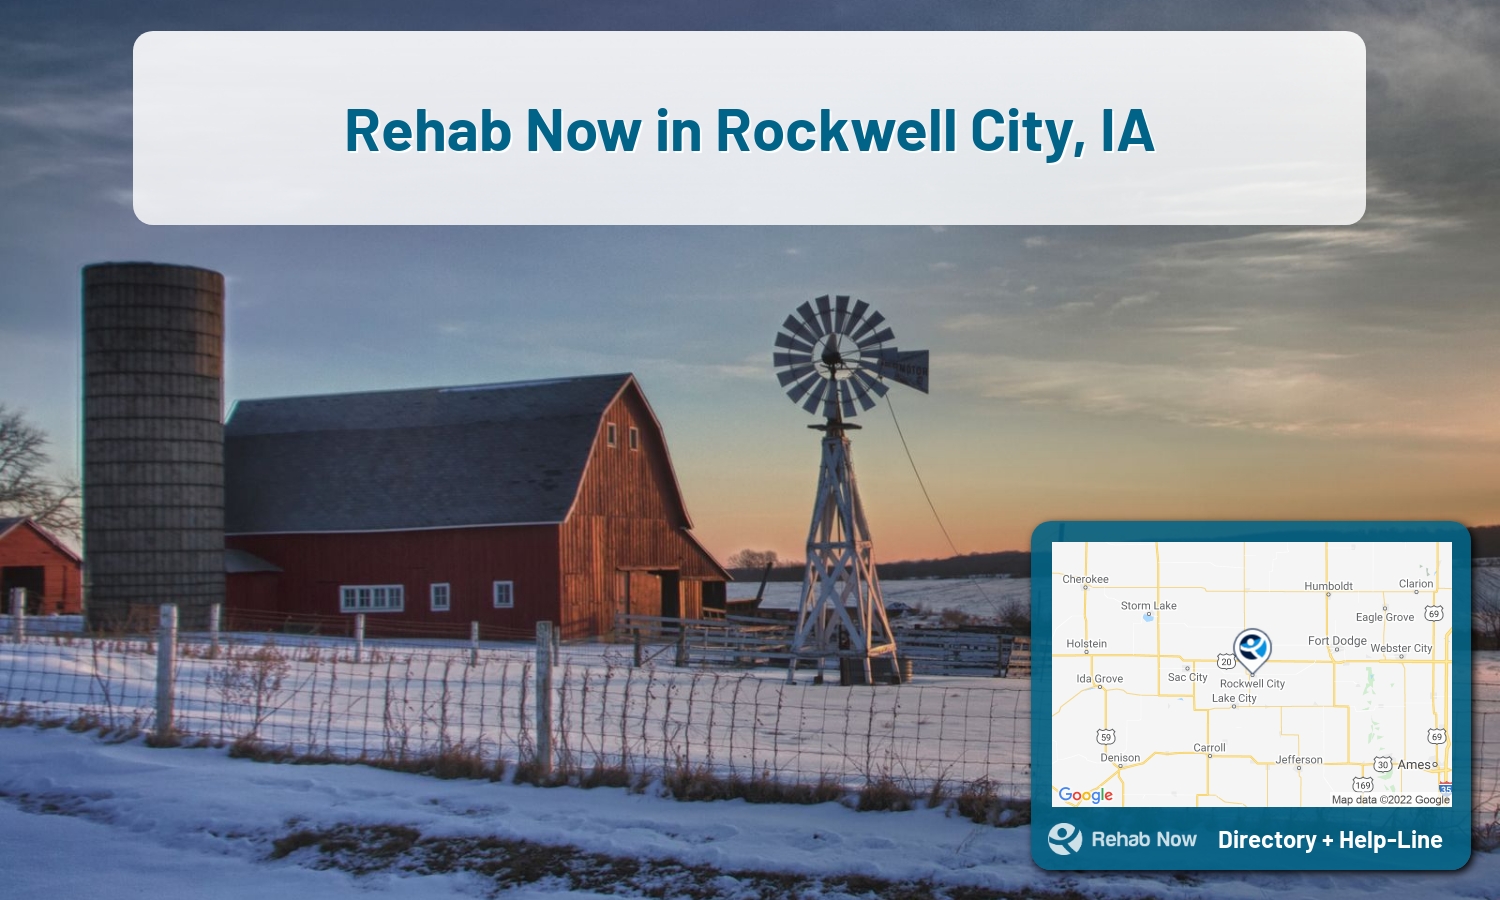 Let our expert counselors help find the best addiction treatment in Rockwell City, Iowa now with a free call to our hotline.